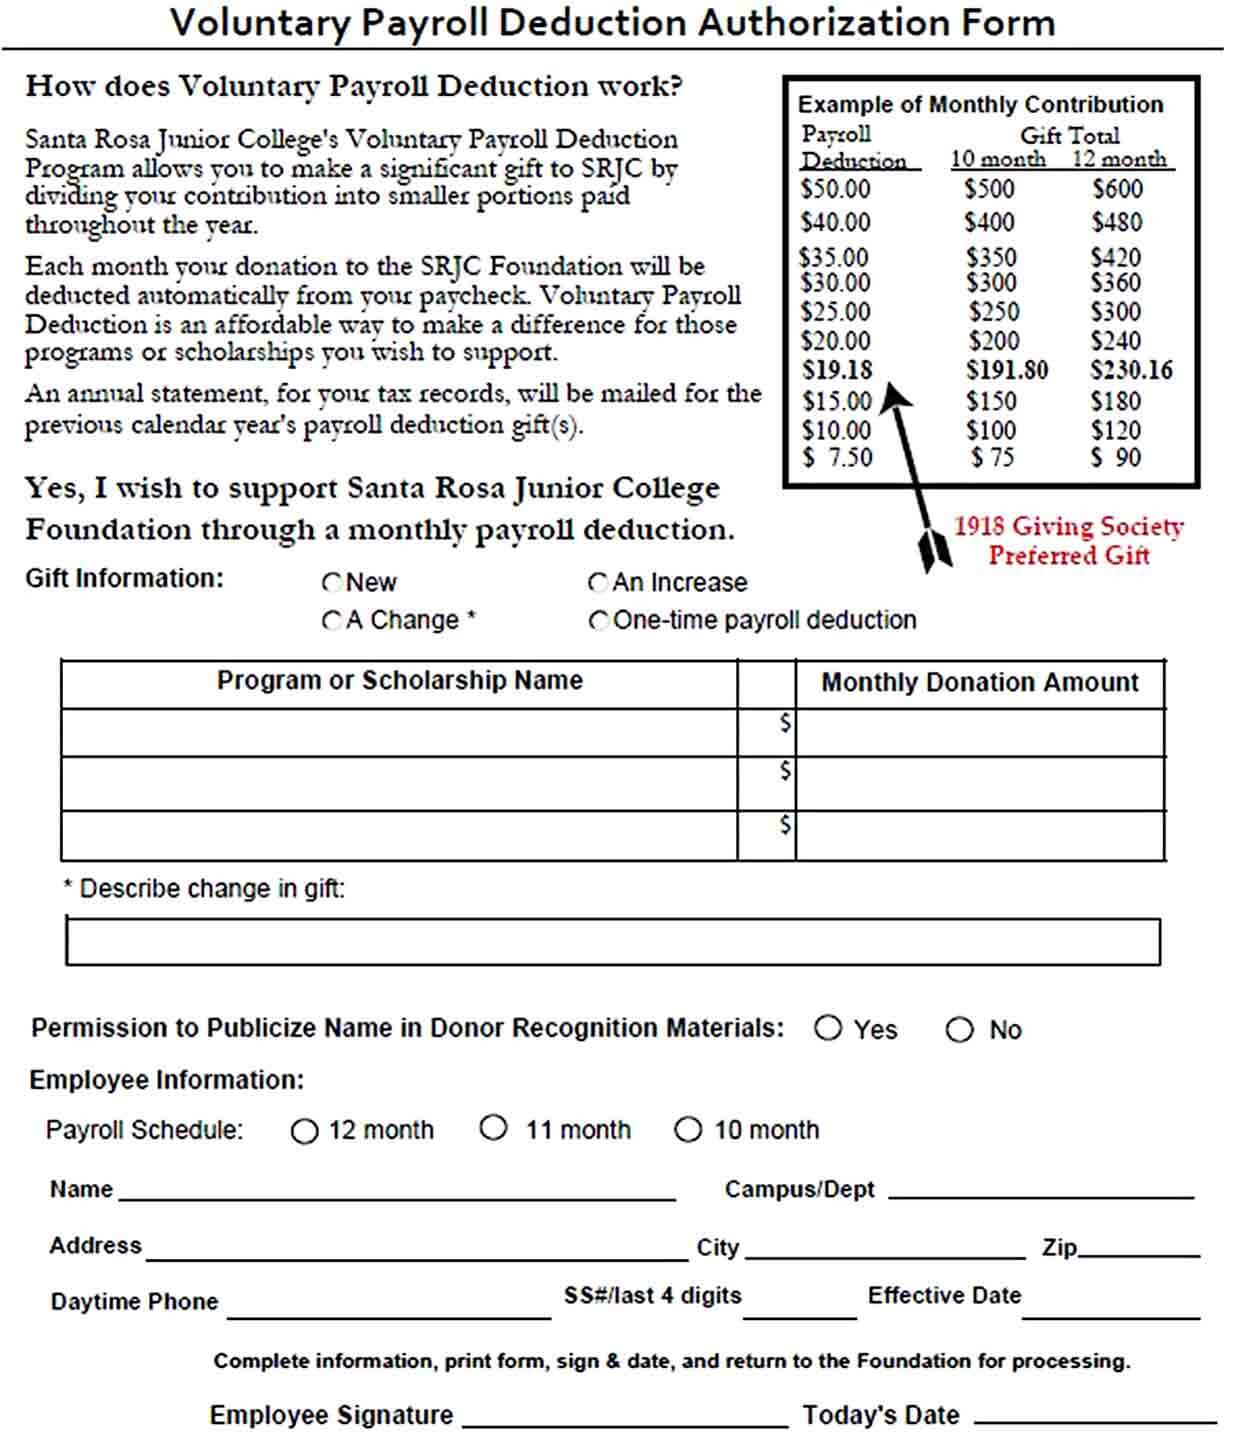 Voluntary Payroll Deduction Form PDF Download